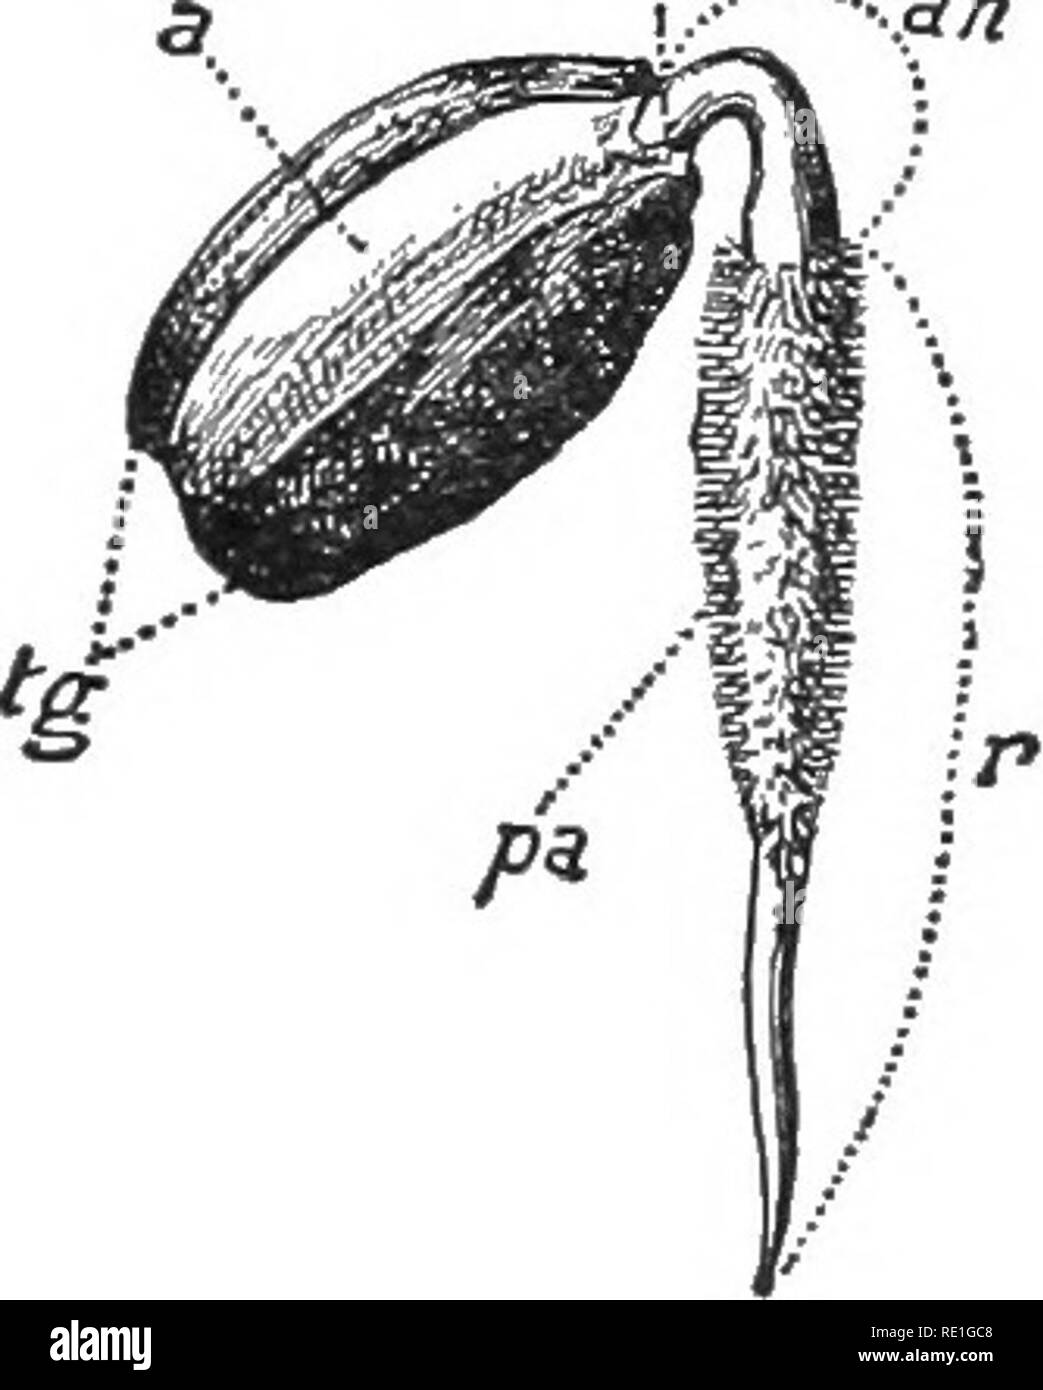 . Elementary plant physiology. Plant physiology. Reproduction and Germination. 41 A number of internodes which have attained but a fraction of their final length may be distinguished near the apex of the stem. What is the fate of the endosperm? (See &quot;Nutrition and metabolism.&quot;) 35. Germination of seeds of Ricinus.âSoak some seeds of the castor-oil plant {Ricinus) in water for a day, then place in moist sawdust or soil. Dissect one of the swelling seeds, and note the form and consistency of the thin, white cotyledons, and the endosperm filled with fatty and proteid re- !,â â .ah. I ah Stock Photo